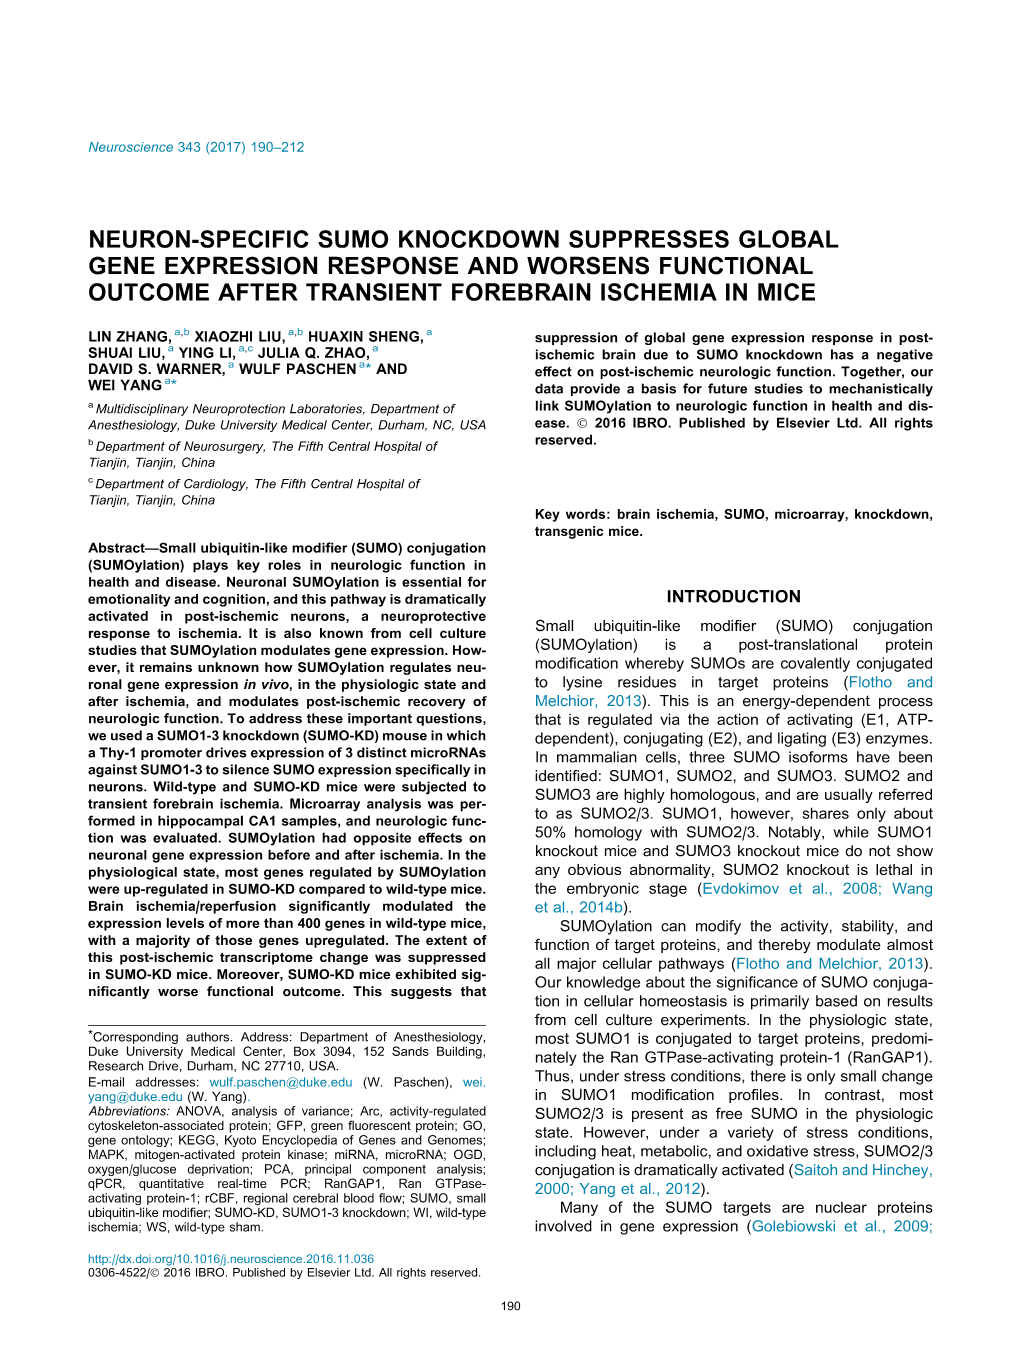 Neuron-Specific Sumo Knockdown Suppresses Global Gene Expression Response and Worsens Functional Outcome After Transient Forebrain Ischemia in Mice